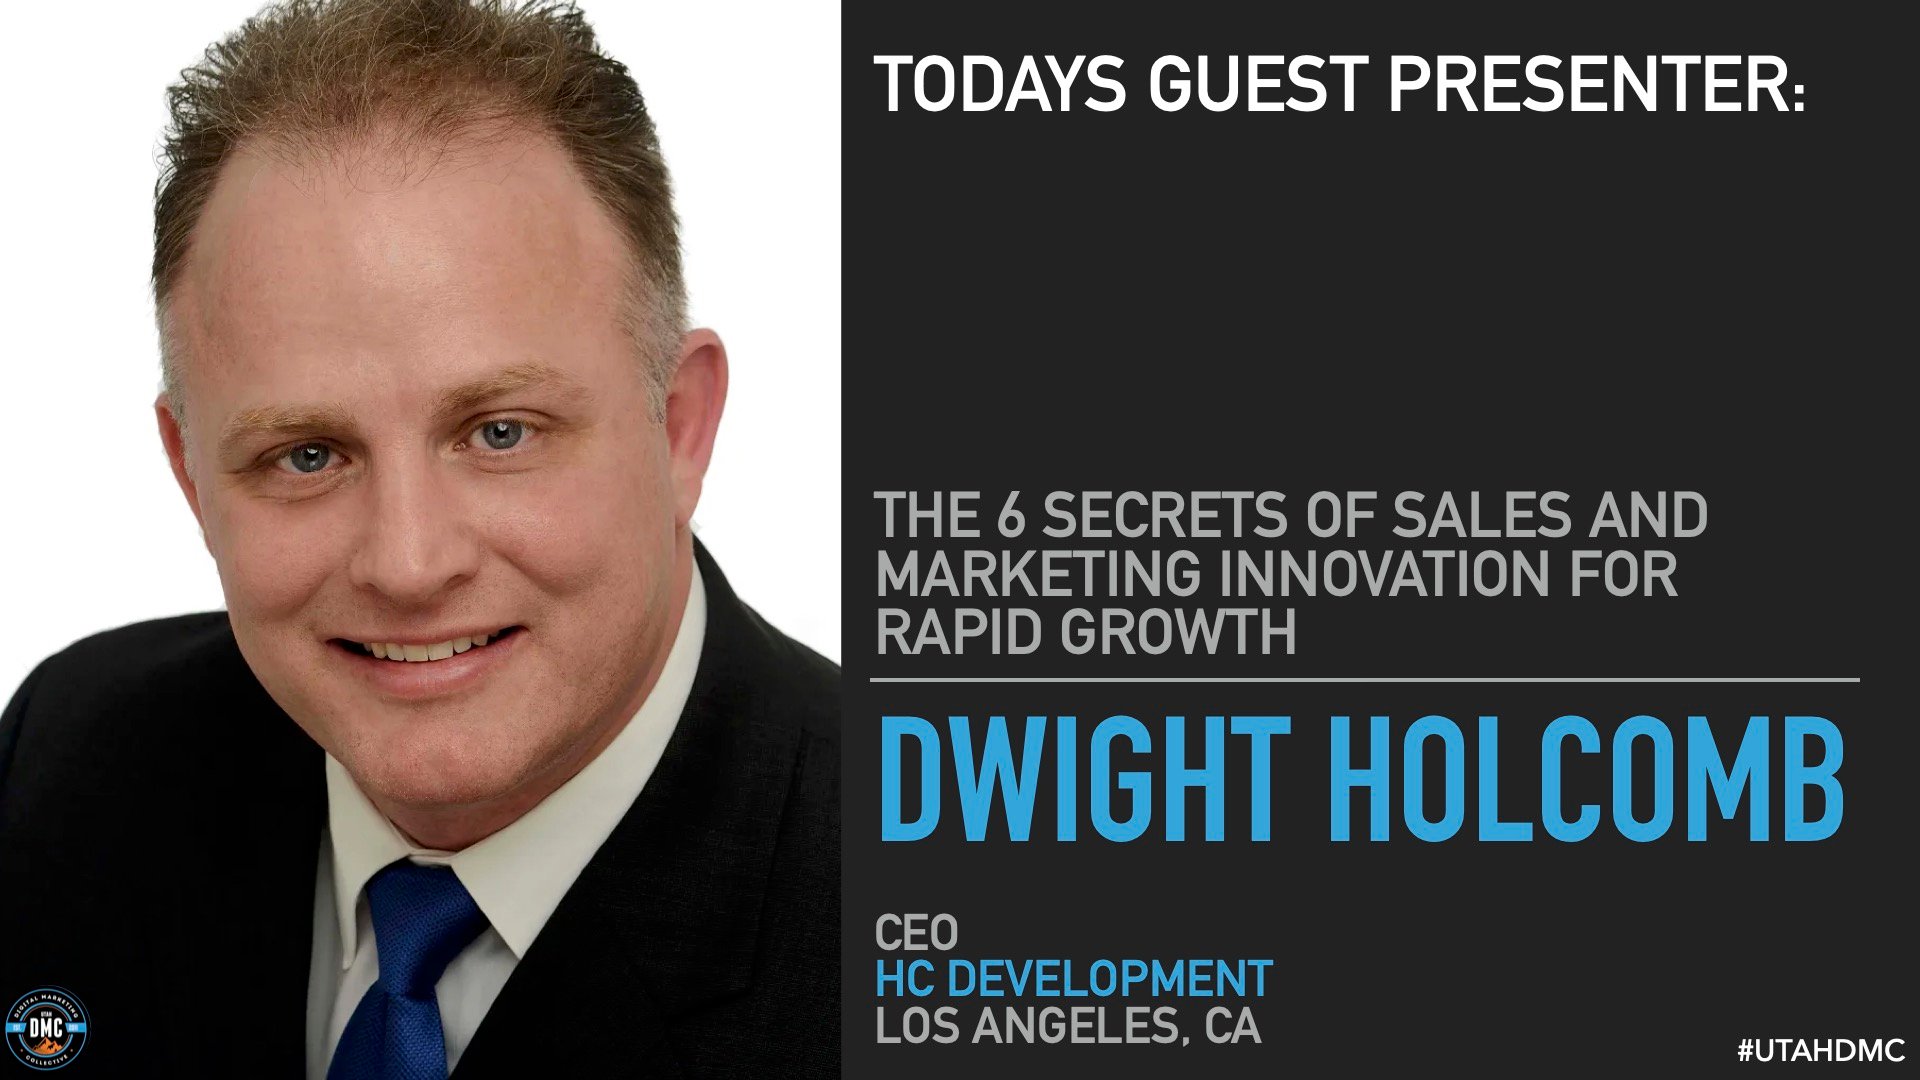 Utah DMC - Dwight Holcomb - The 6 Secrets of Sales and Marketing Innovation for Rapid Growth